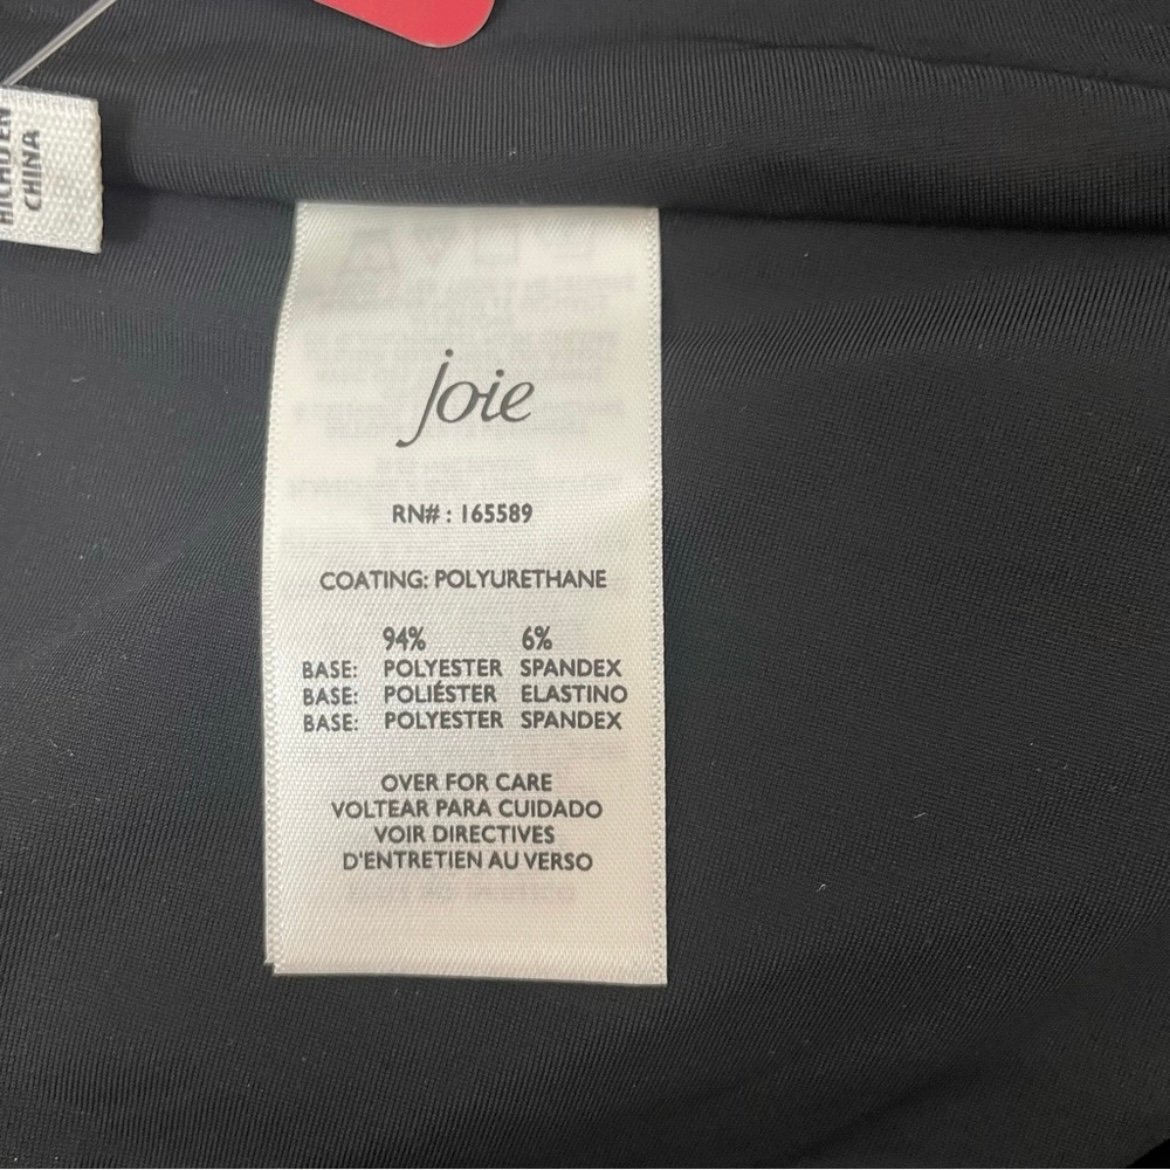 Buy Joie Seamless Stretch Faux Leather Pull-On High rise leggings black XXL KSRnGU1iS Factory Price